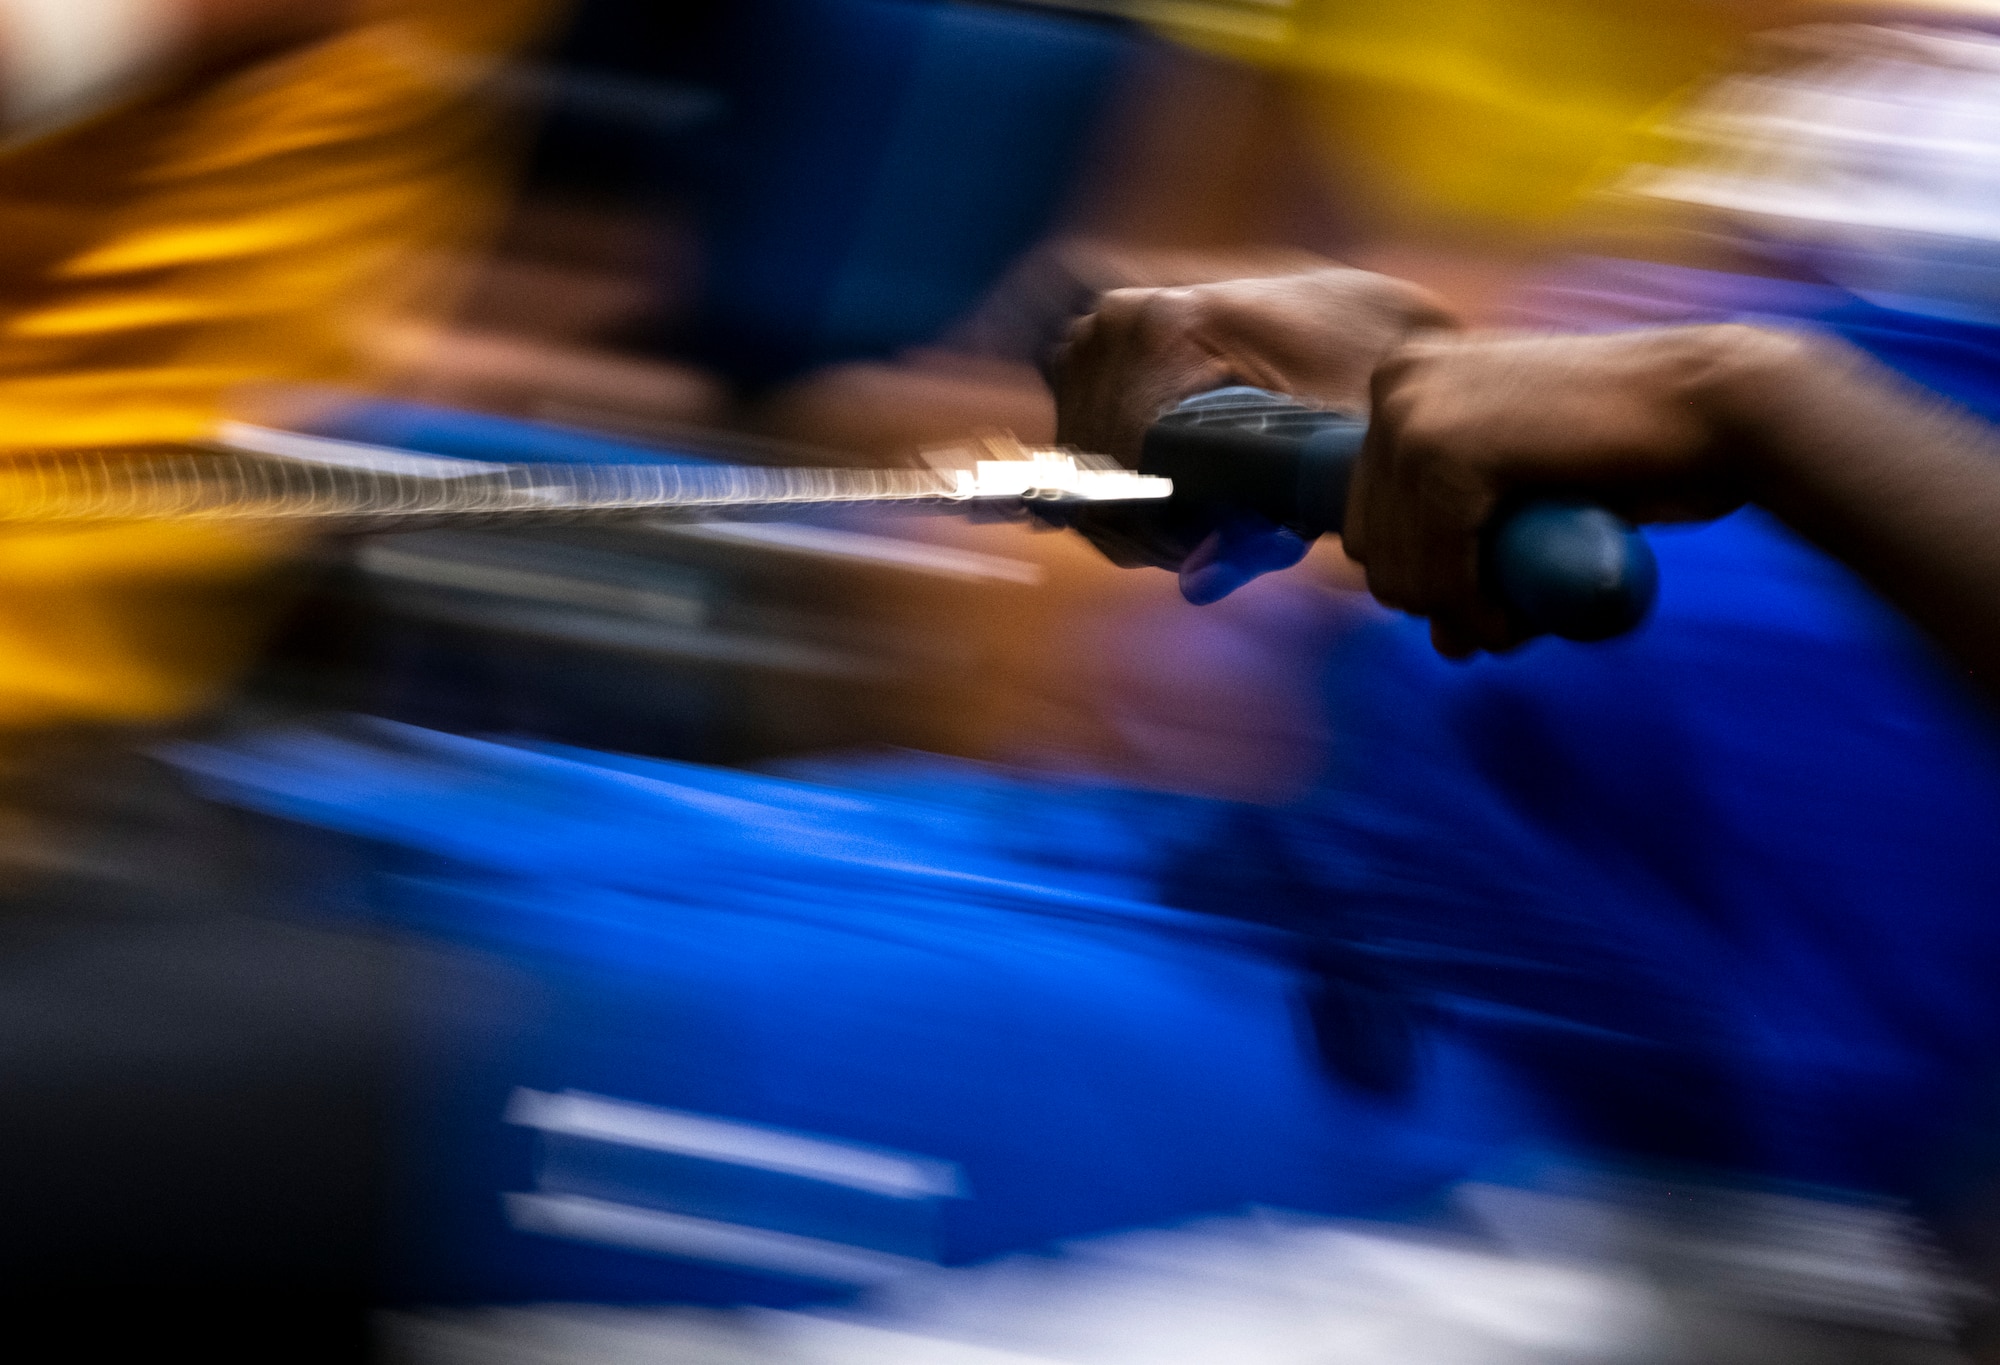 U.S. Air Force Reserve Staff Sgt. Kevin Greene, Team Air Force, competes in indoor rowing at the 2019 DoD Warrior Games in Tampa, Florida, June 25, 2019. The Warrior Games were established in 2010 as a way to enhance the recovery and rehabilitation of wounded, ill and injured service members and expose them to adaptive sports. Approximately 300 athletes are participating in 13 adaptive sport competitions June 21-30. The athletes represent the United States Army, Marine Corps, Navy, Air Force and Special Operations Command. Athletes from the United Kingdom, Australia, Canada, the Netherlands and Denmark will also compete. (DoD photo by U.S. Air Force Staff Sgt. Marianique Santos)